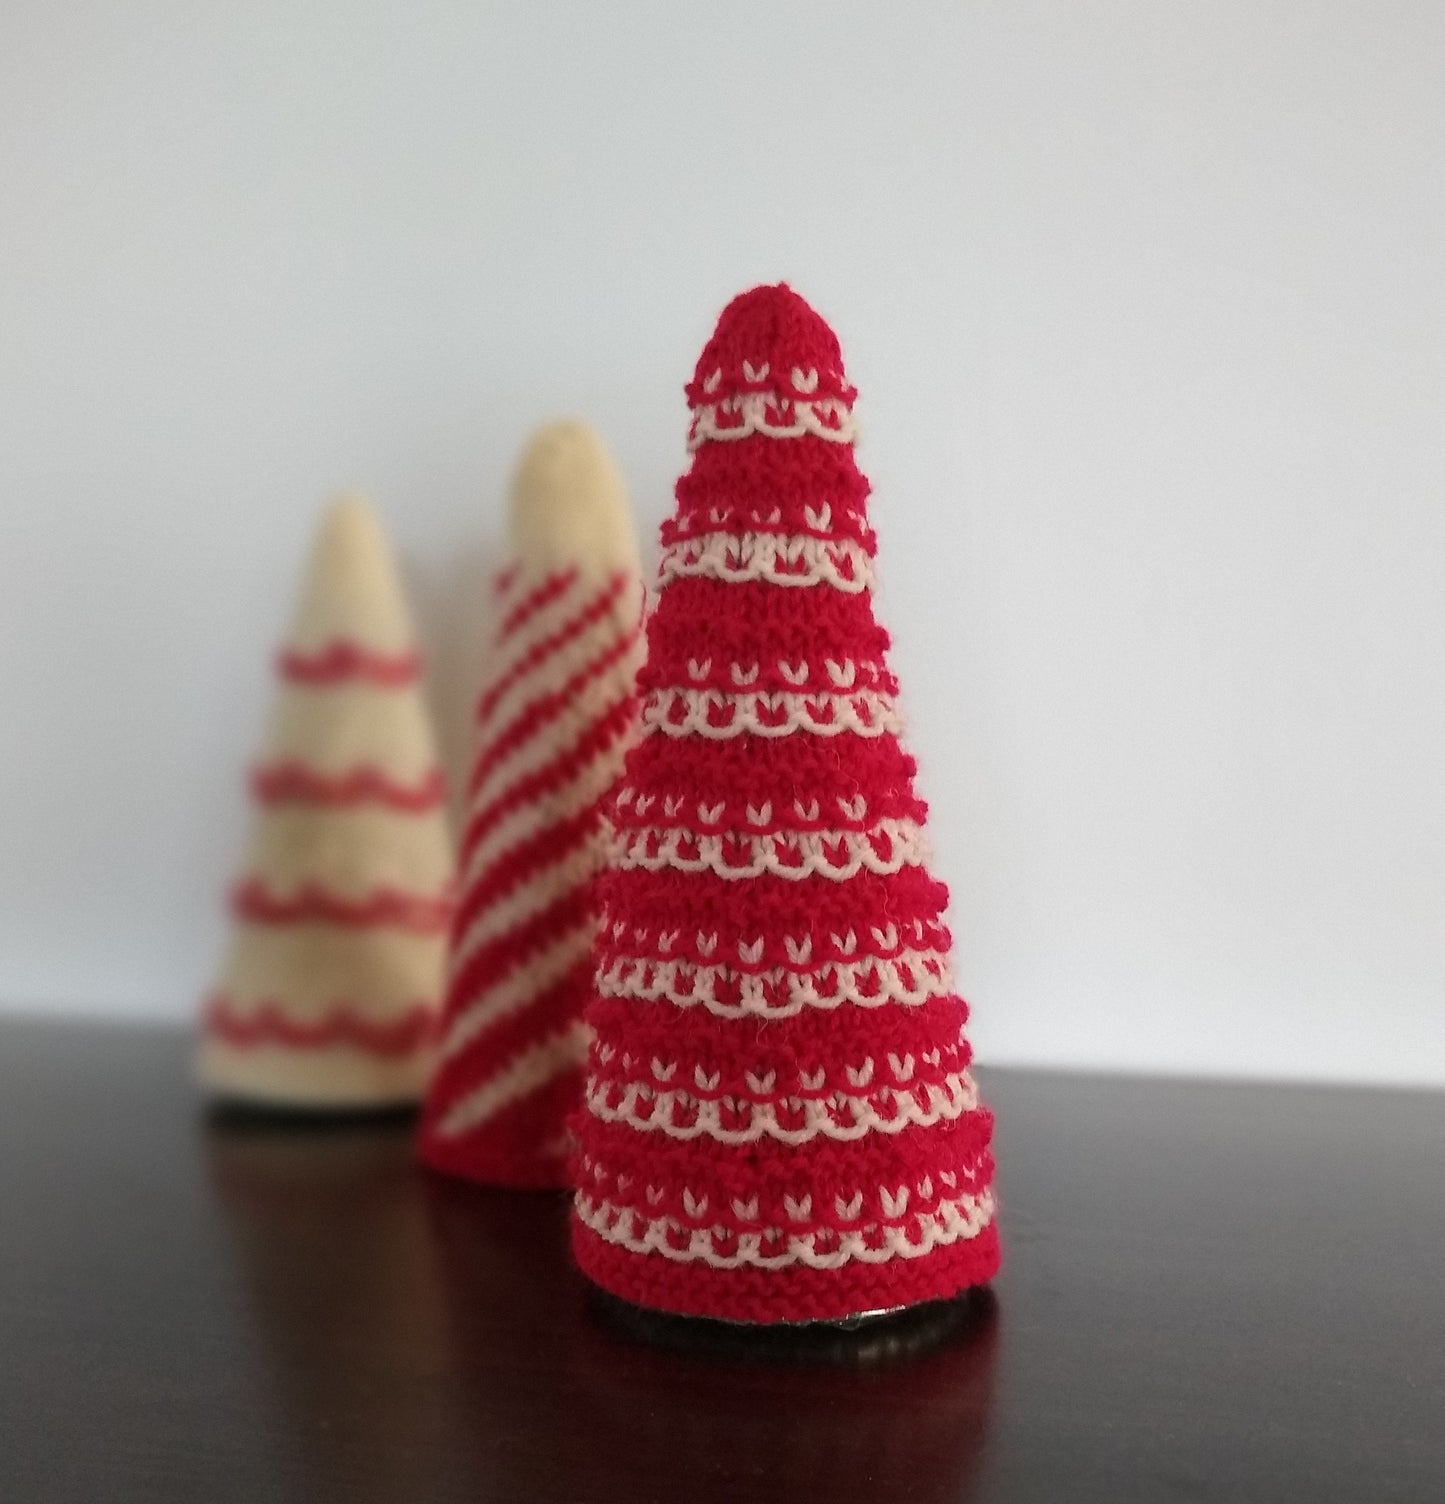 Mini Trees Collection knitting pattern